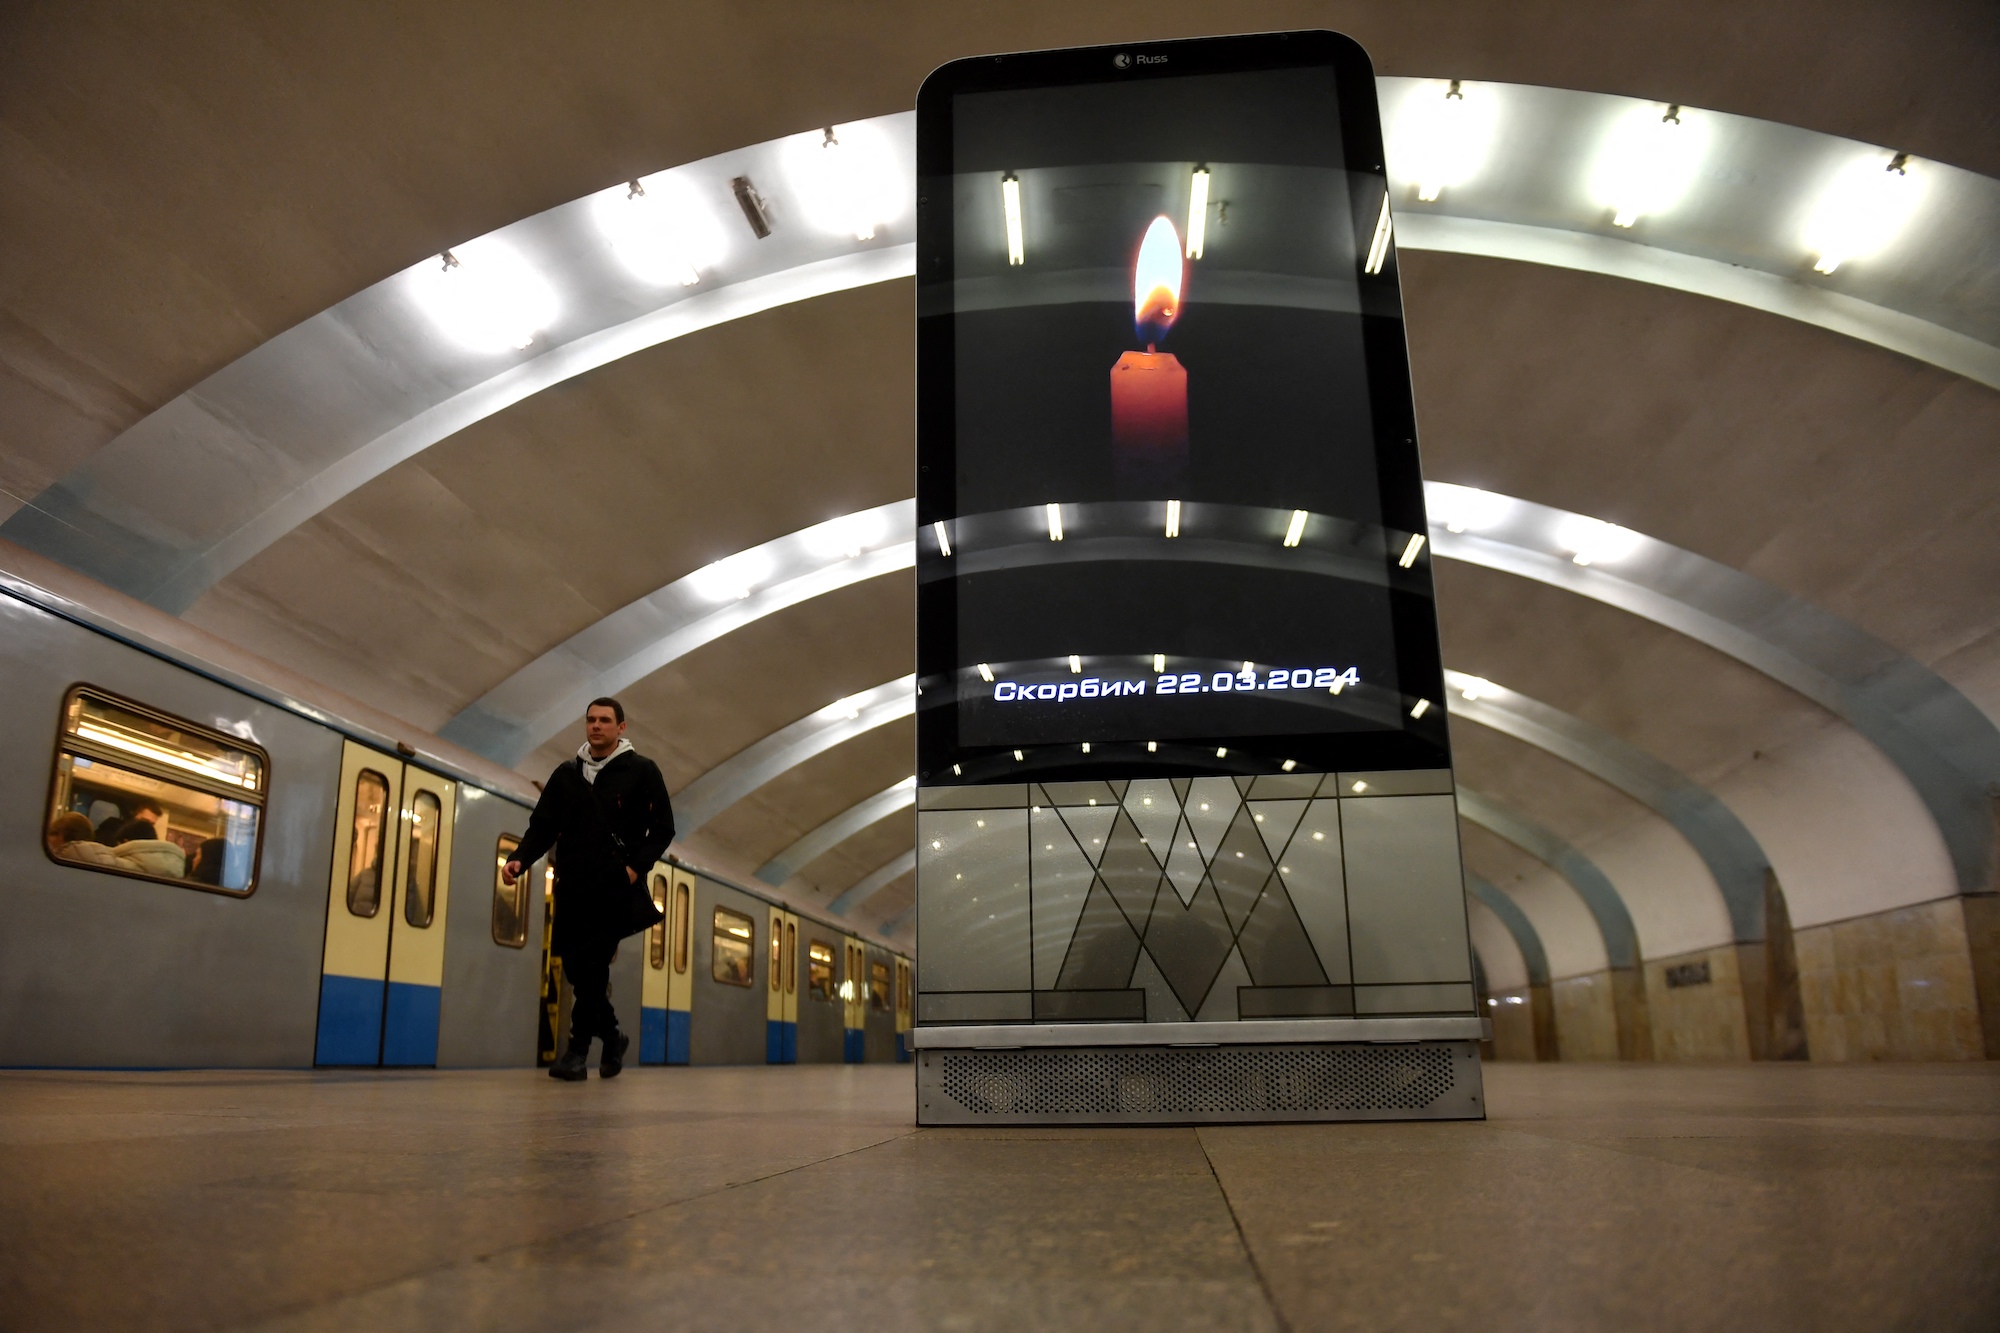 A man walks past an advertising screen displaying an image of a lit candle in Moscow's subway on Sunday.